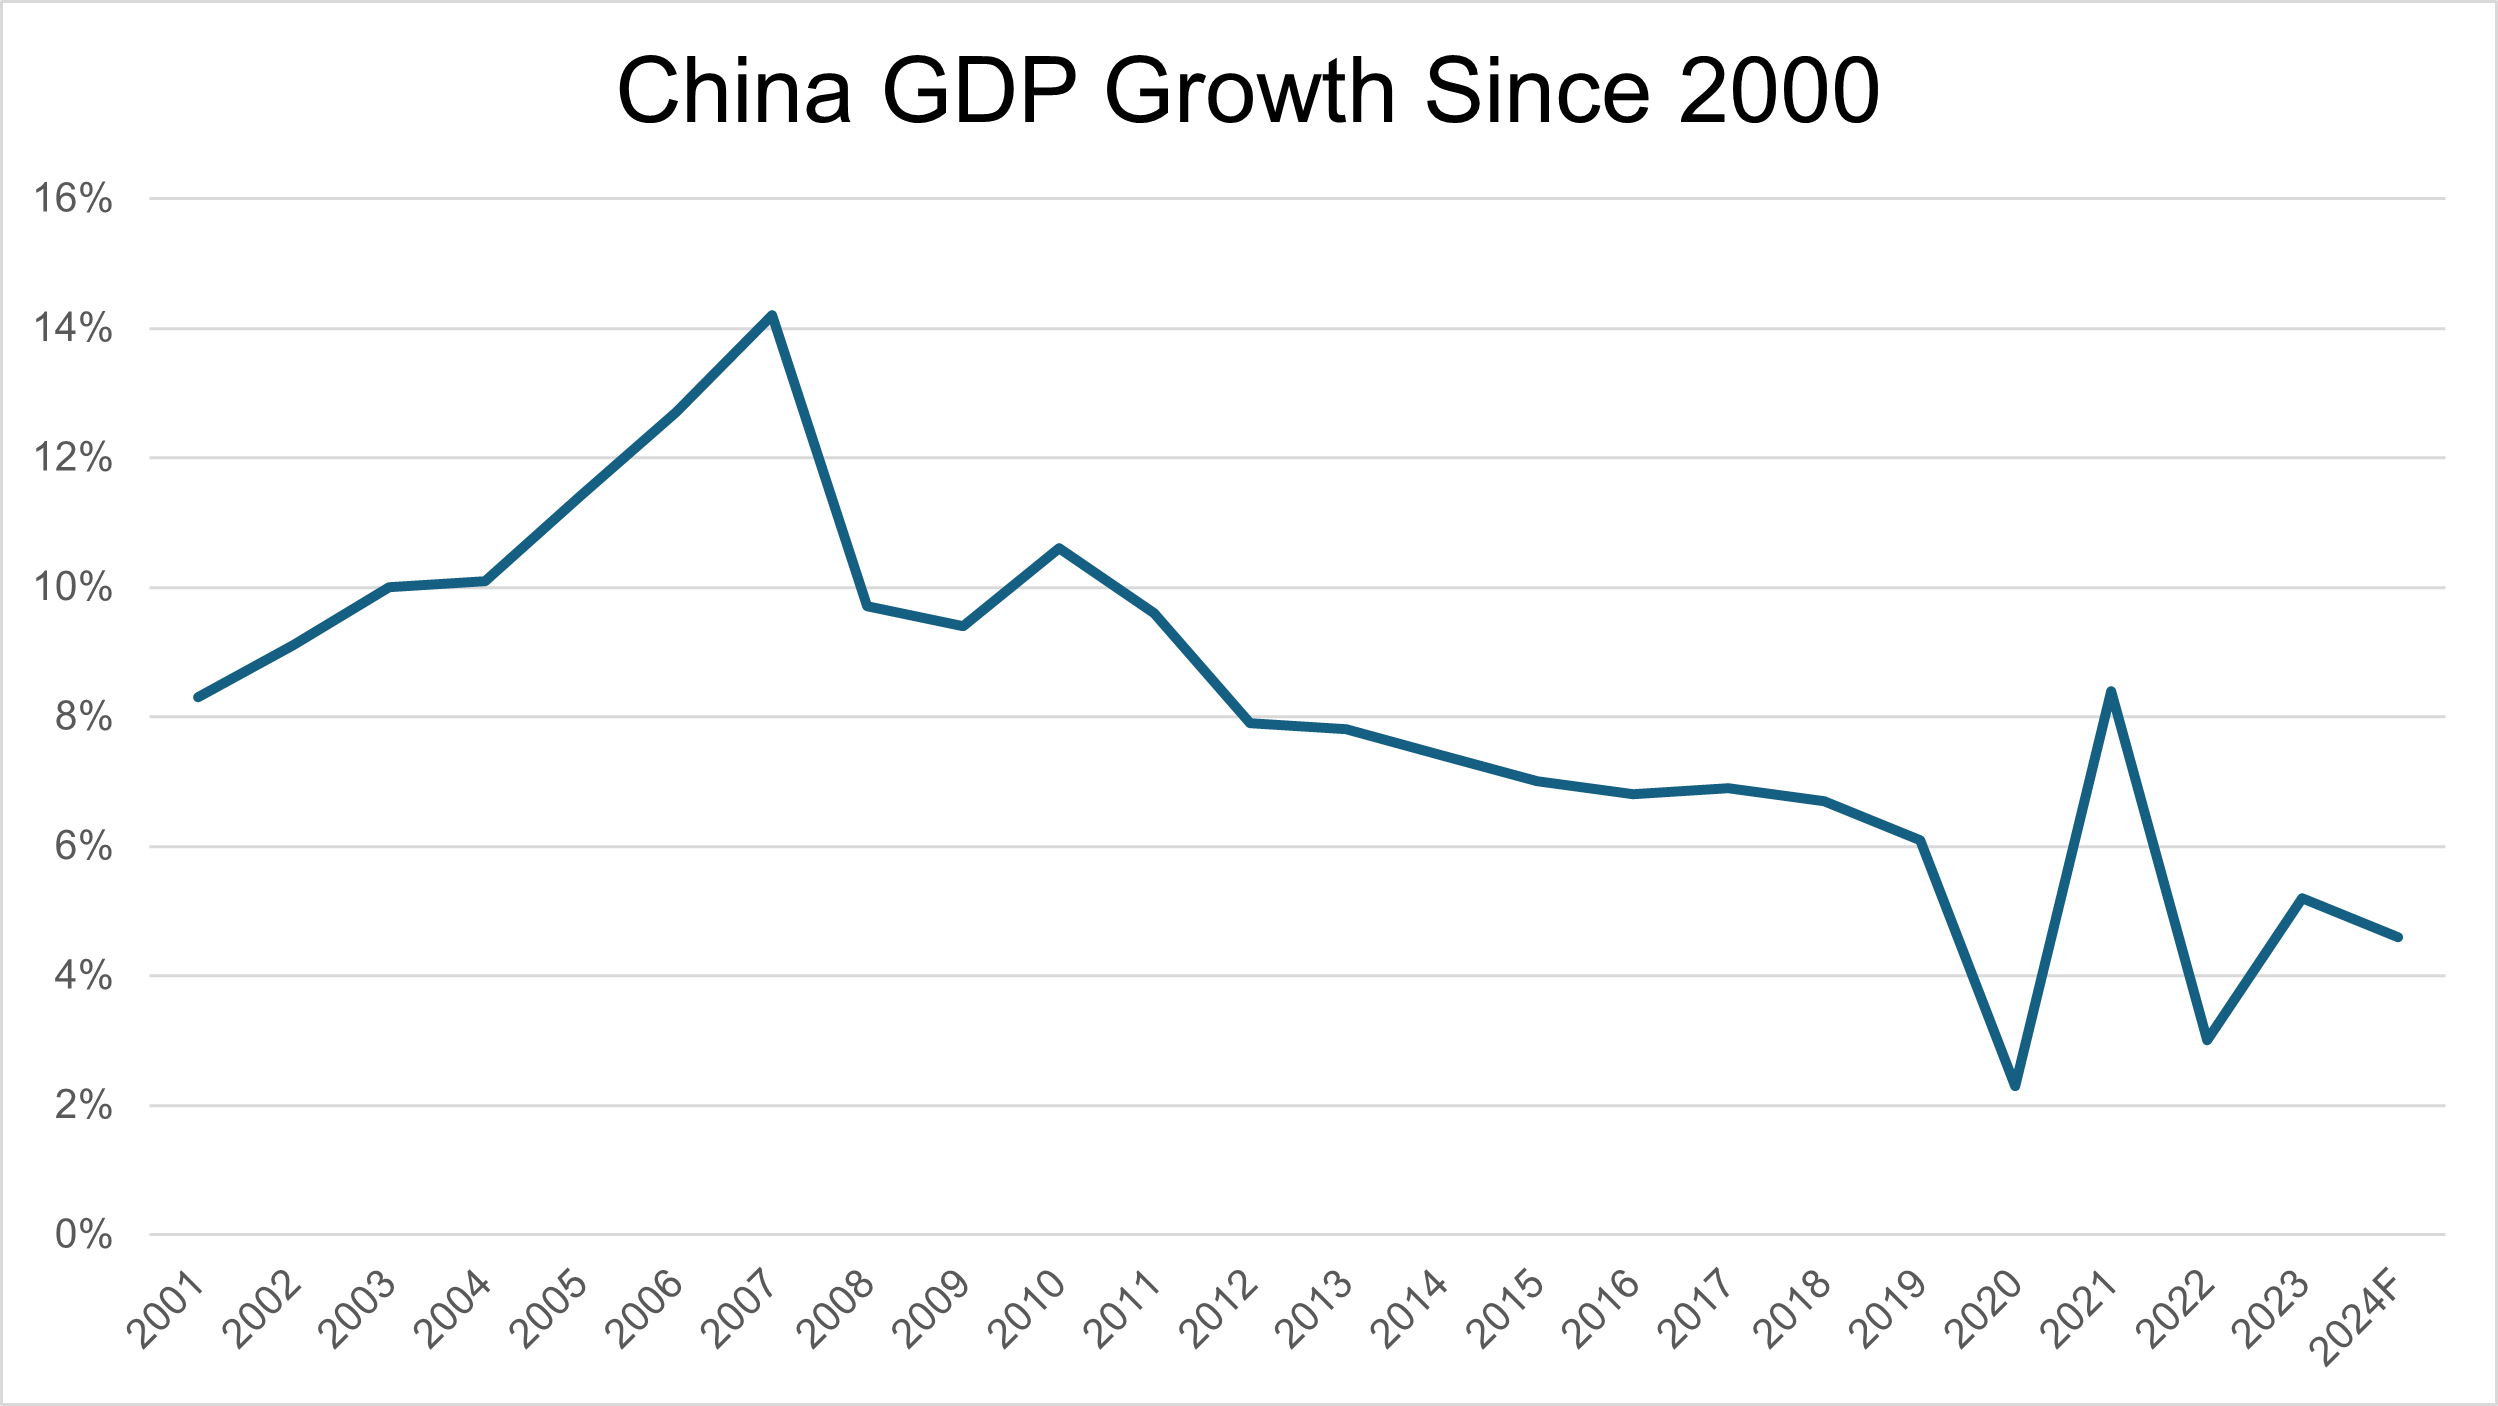 Chinese economic growth has moderated in recent years. Source: The World Bank